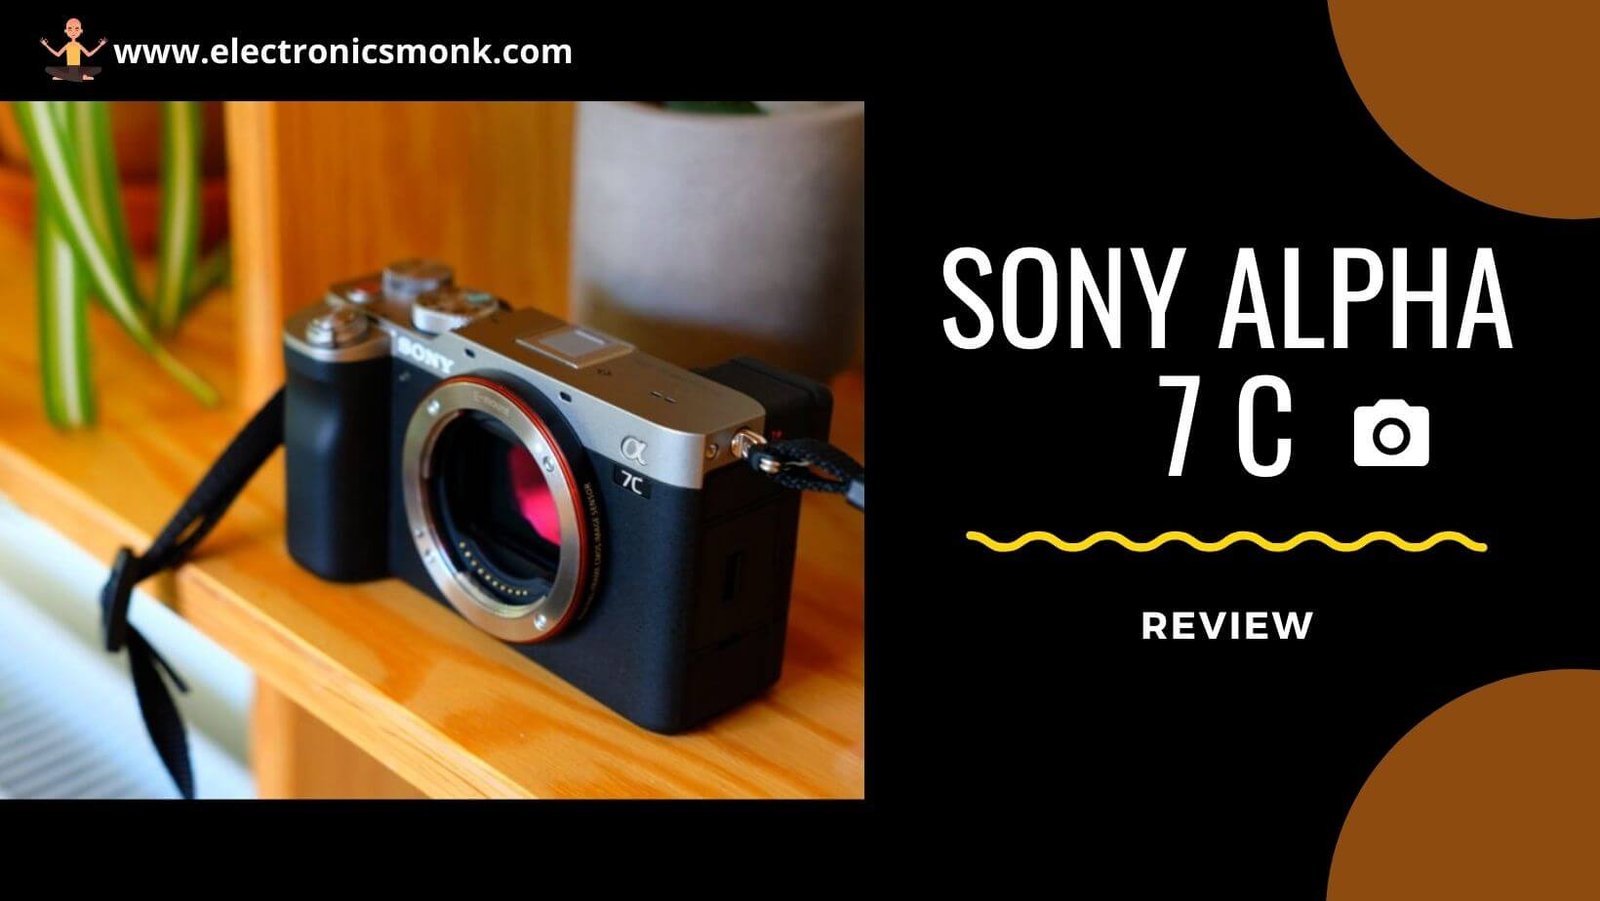 Sony Alpha 7 c review